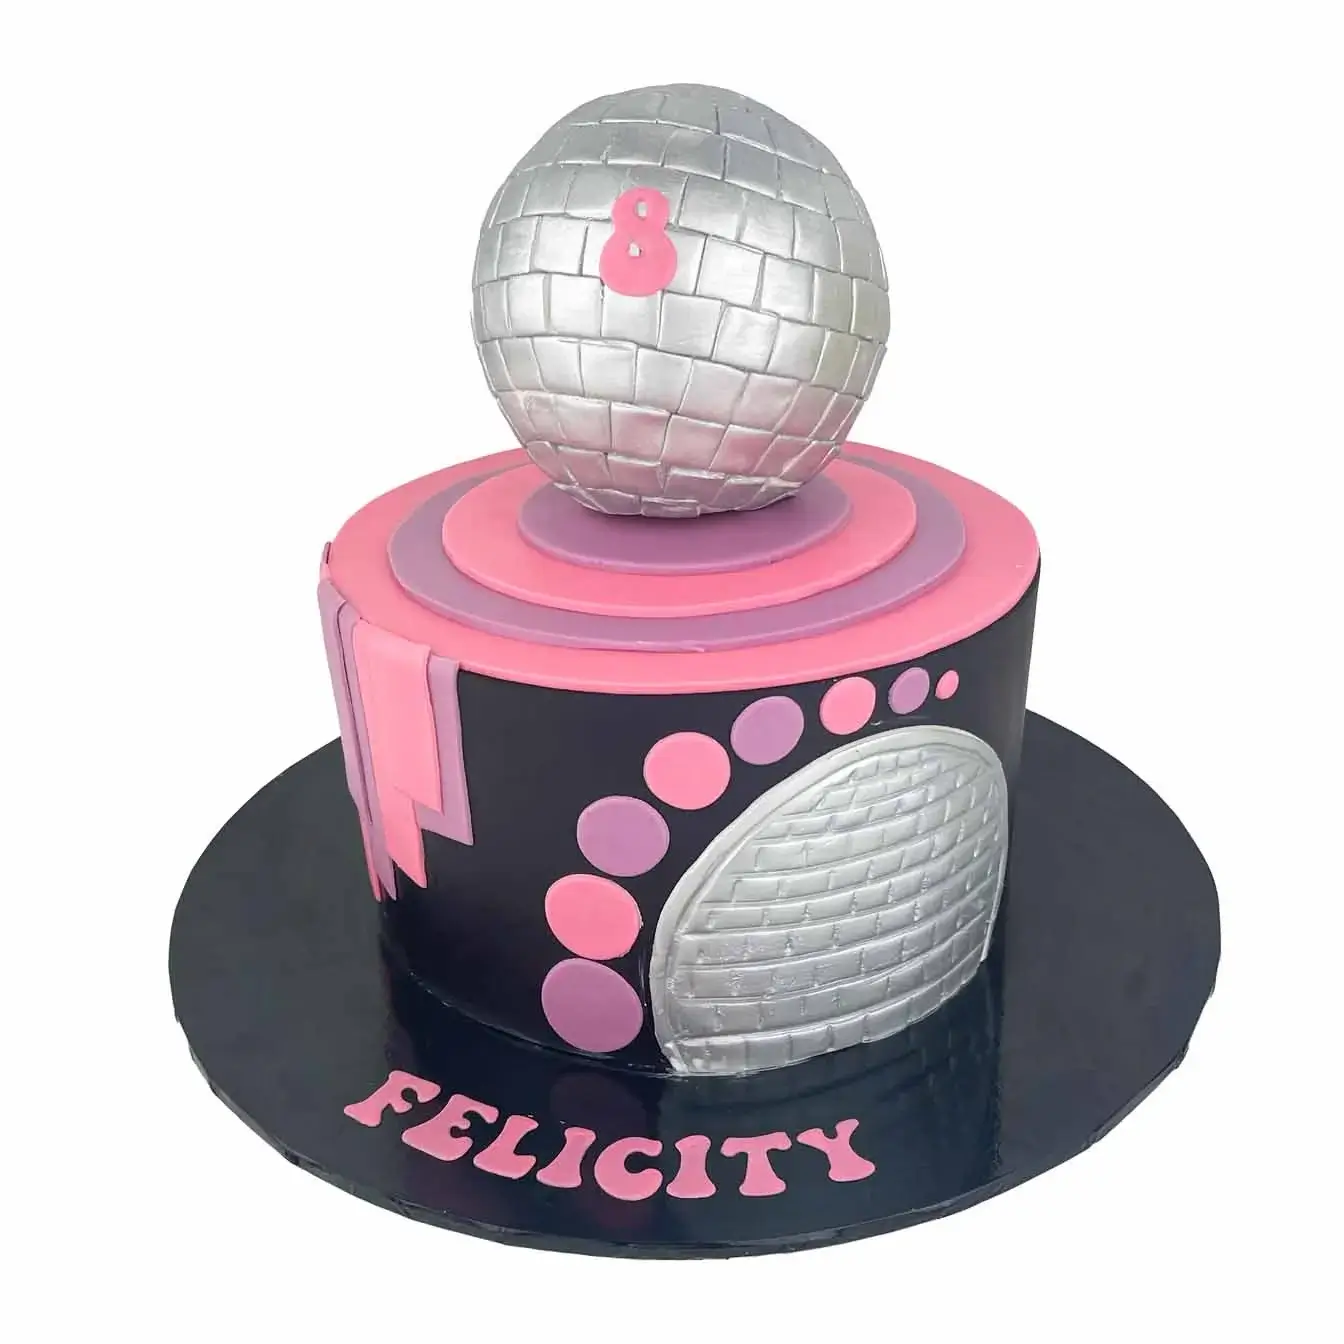 Disco Fever Cake - Black iced cake with cutout polka dots, topped with a molded disco ball and featuring a side cutout disco ball, perfect for a disco-themed celebration.